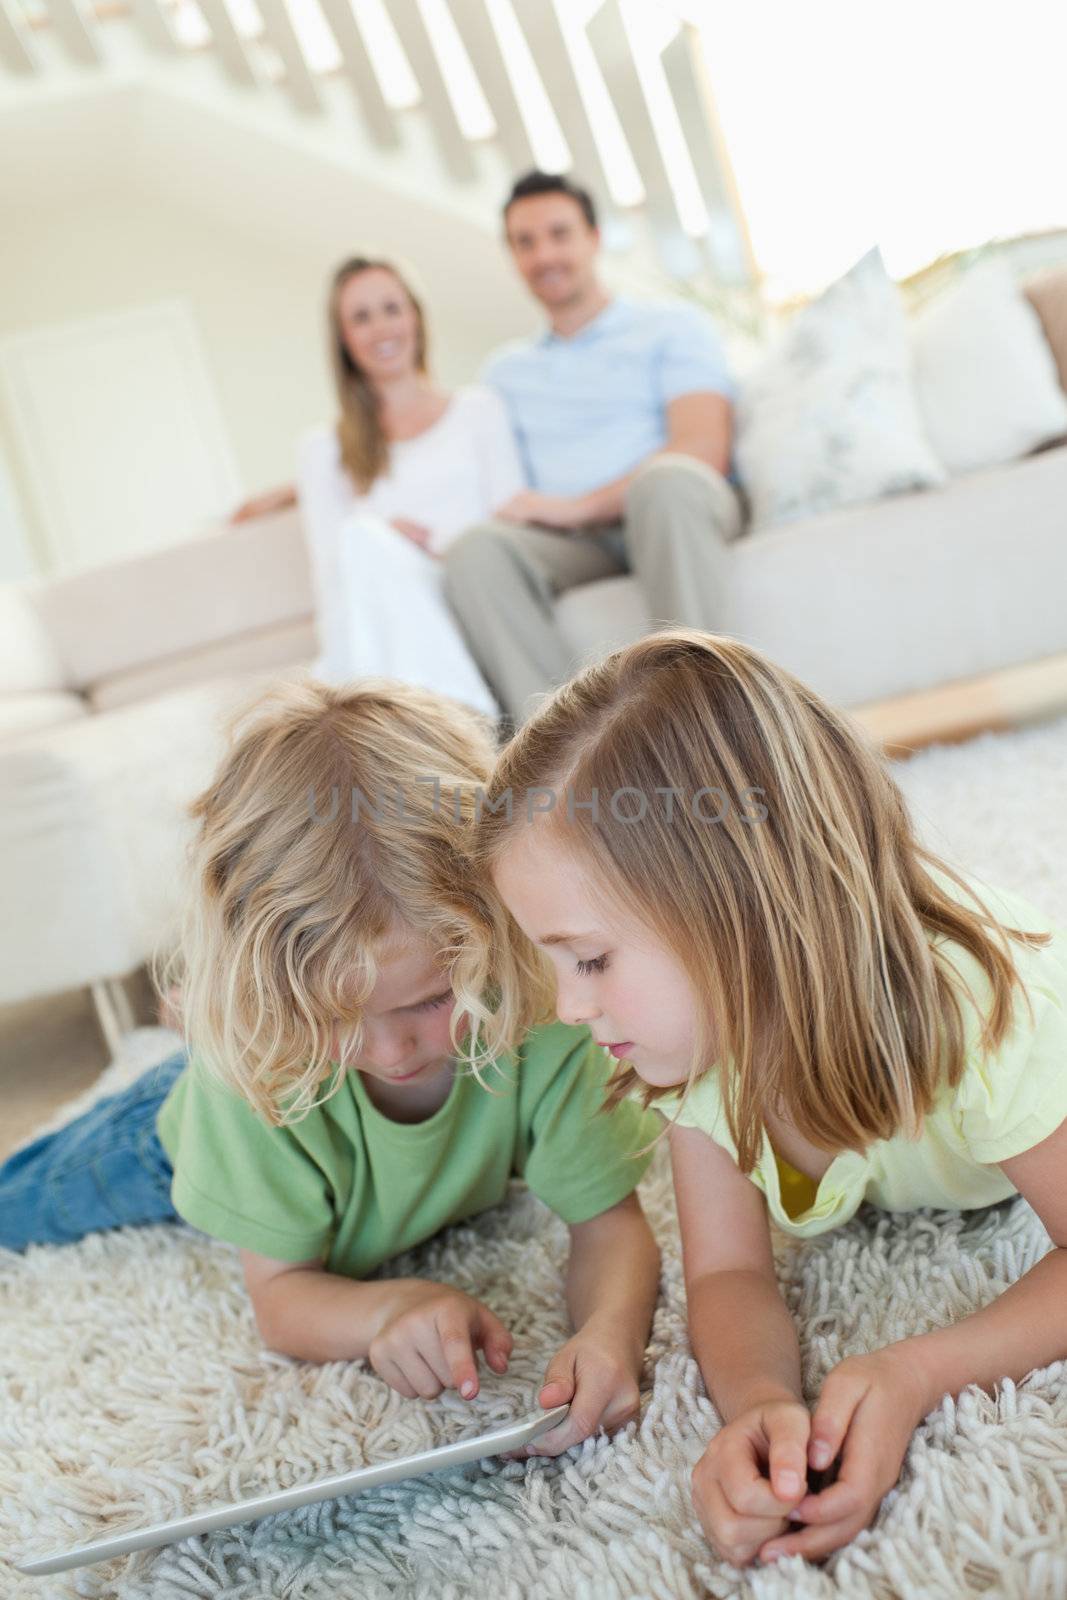 Siblings using tablet together on the carpet with parents behind them